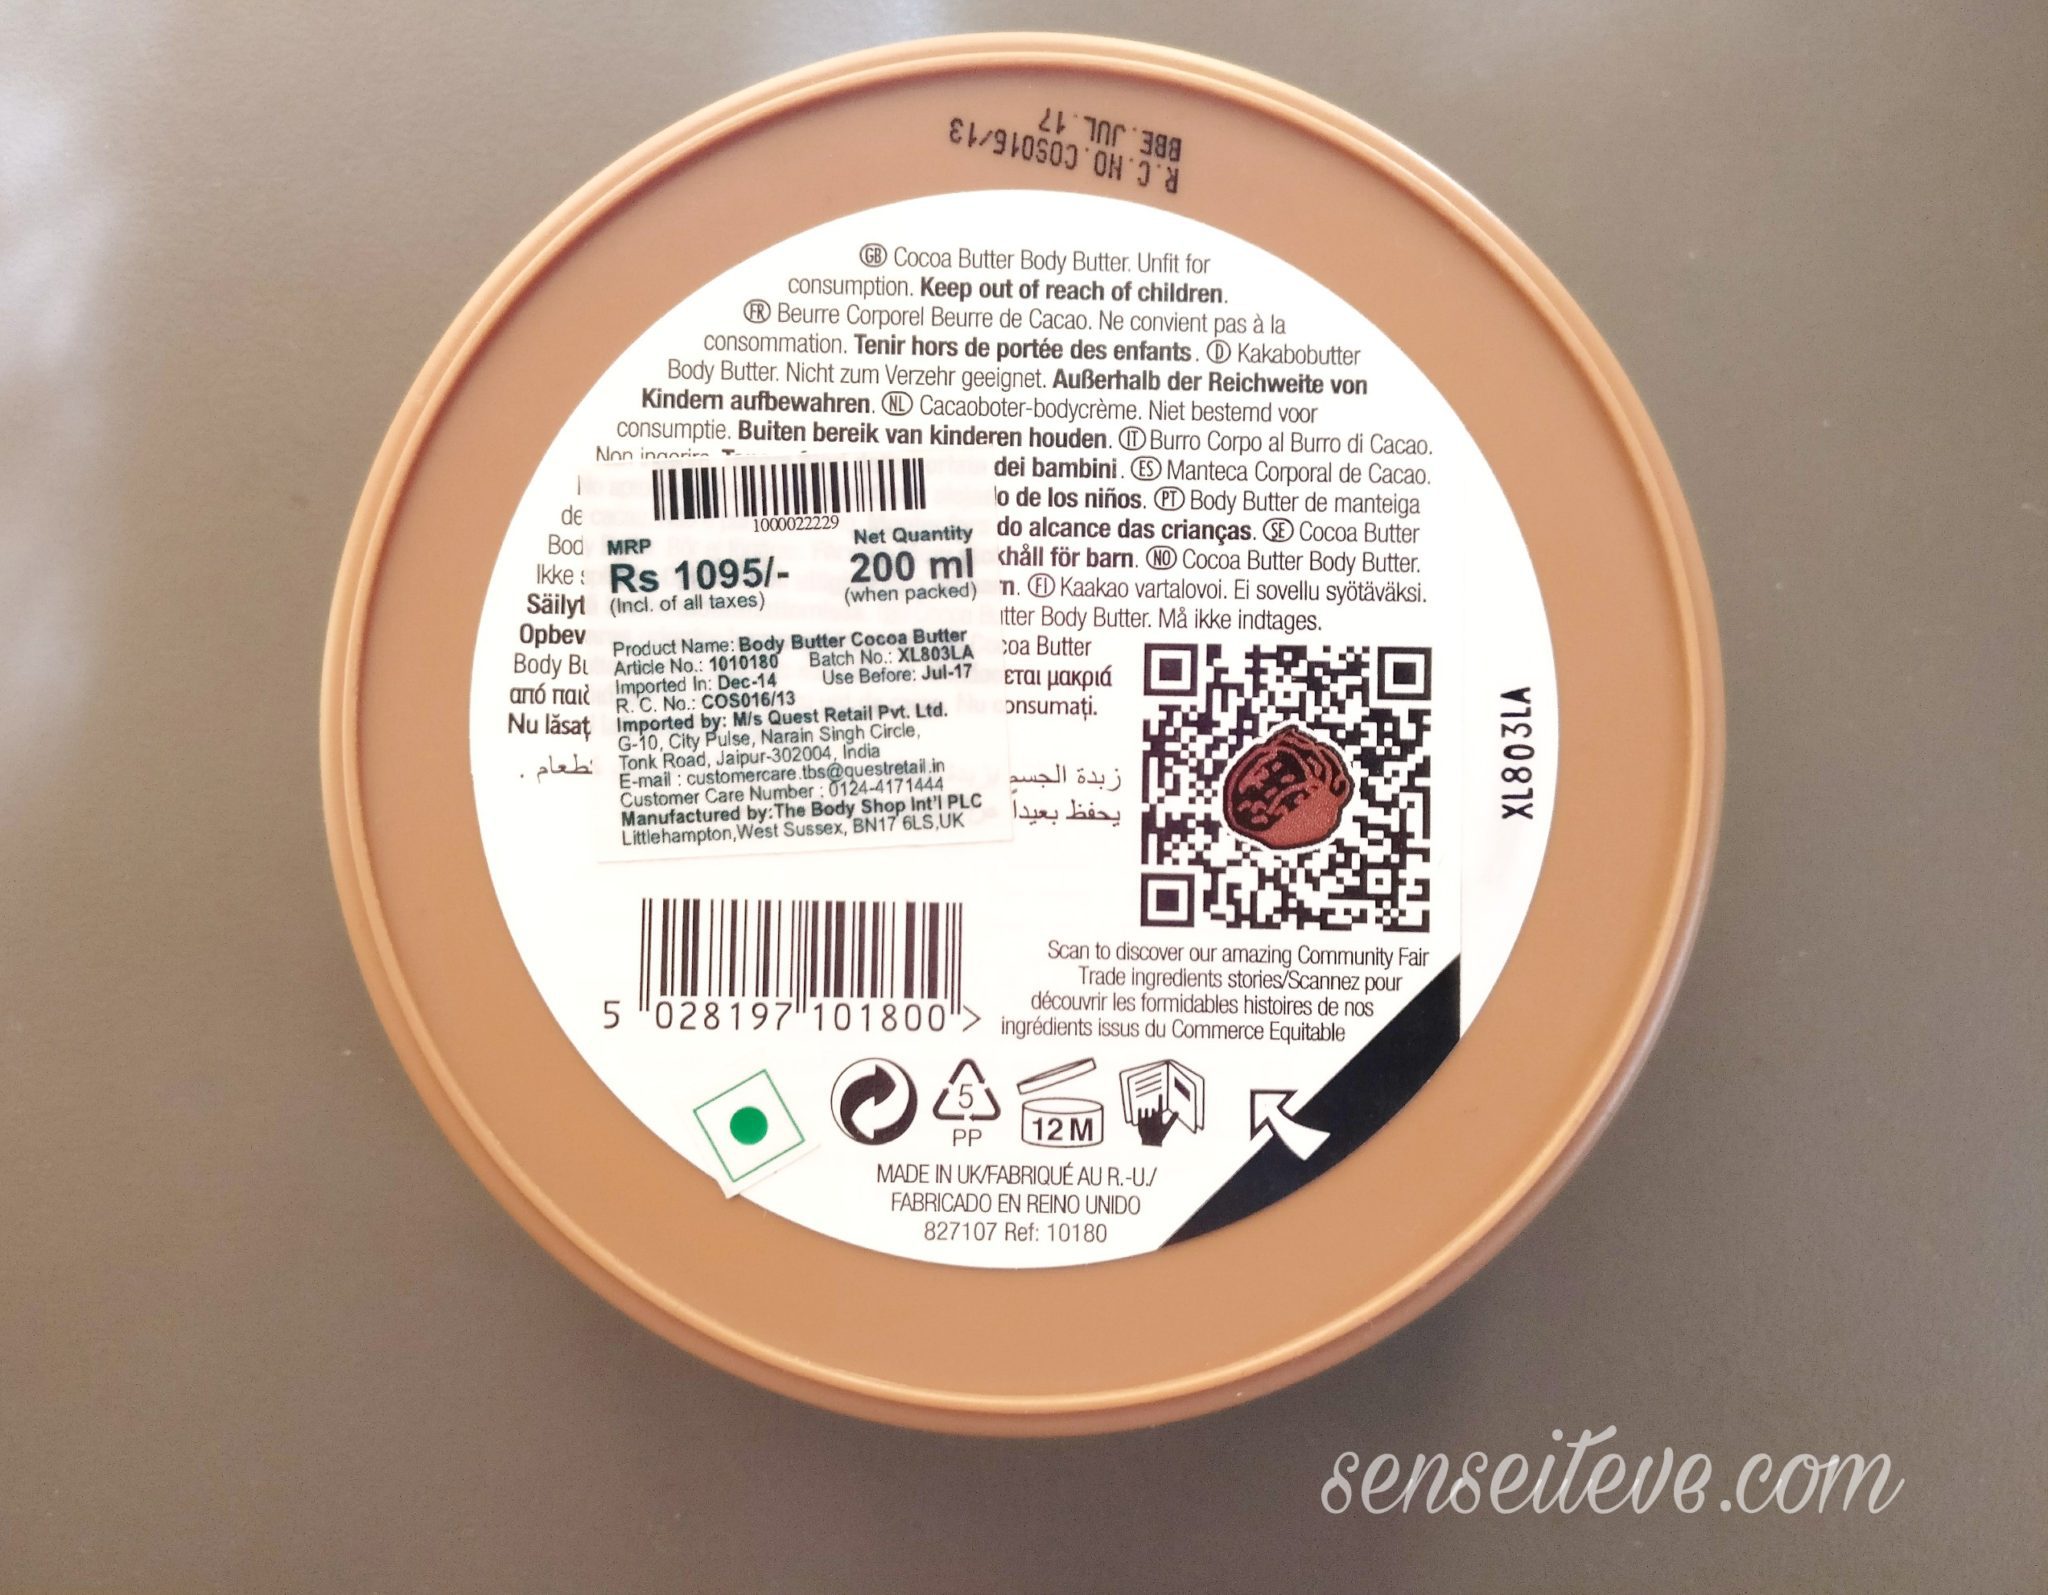 The Body Shop Cocoa Butter Body Butter Price in India Sense It Eve The Body Shop Cocoa Butter Body Butter Review